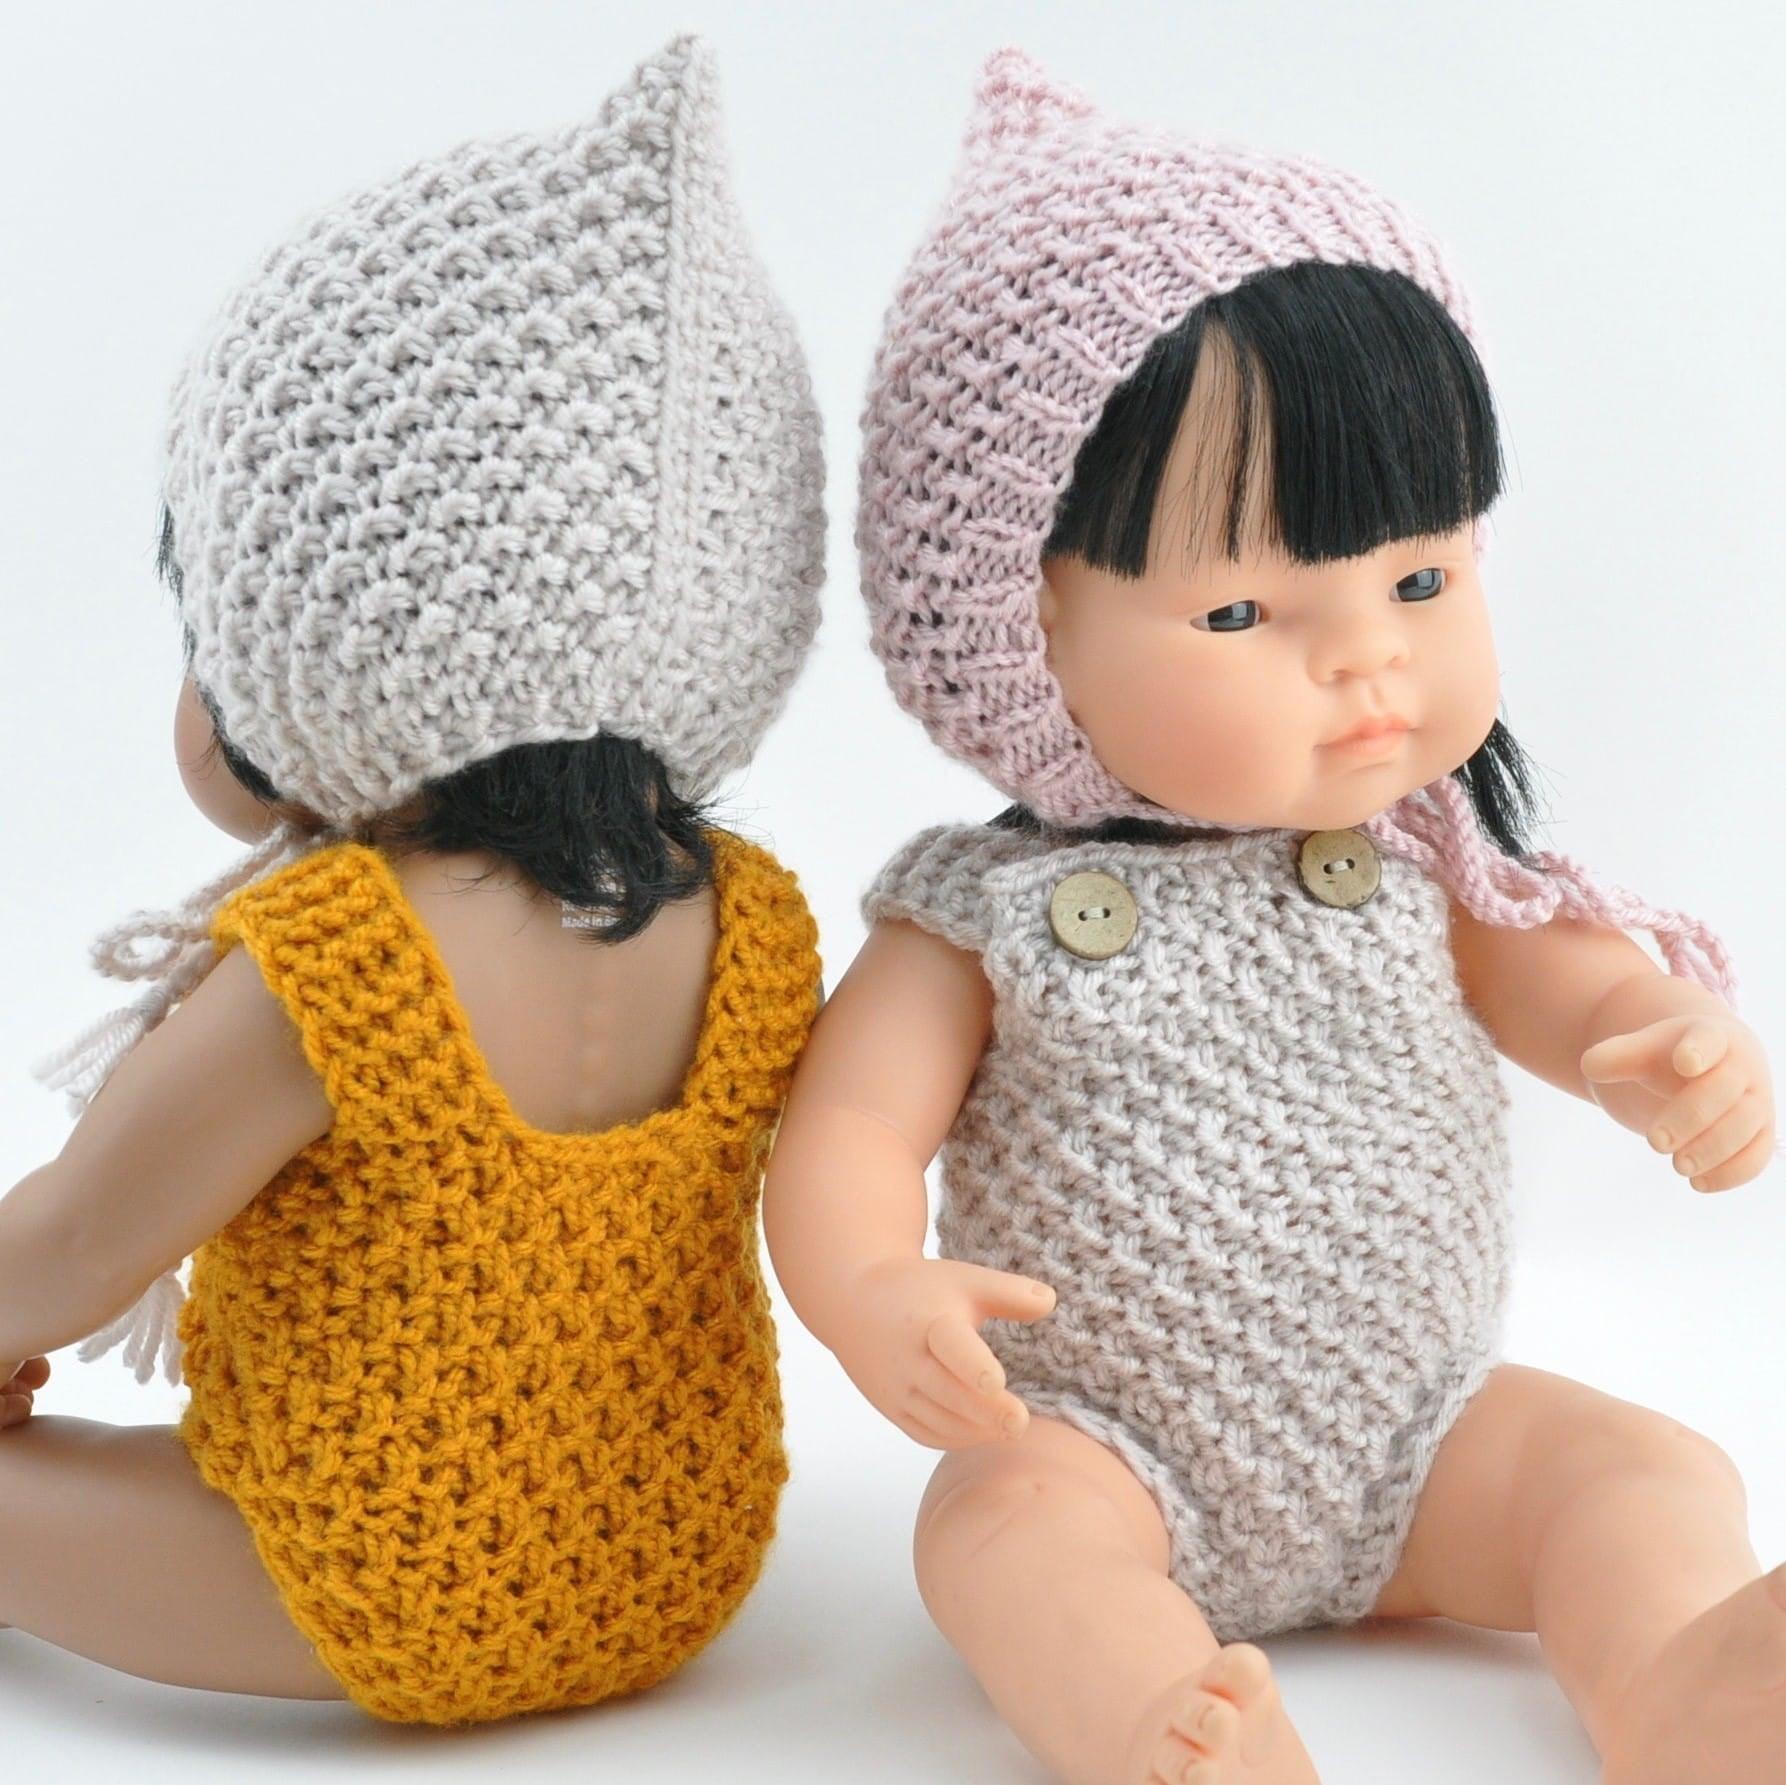 Przytullale: Miniland doll's yarn overalls clothes for doll